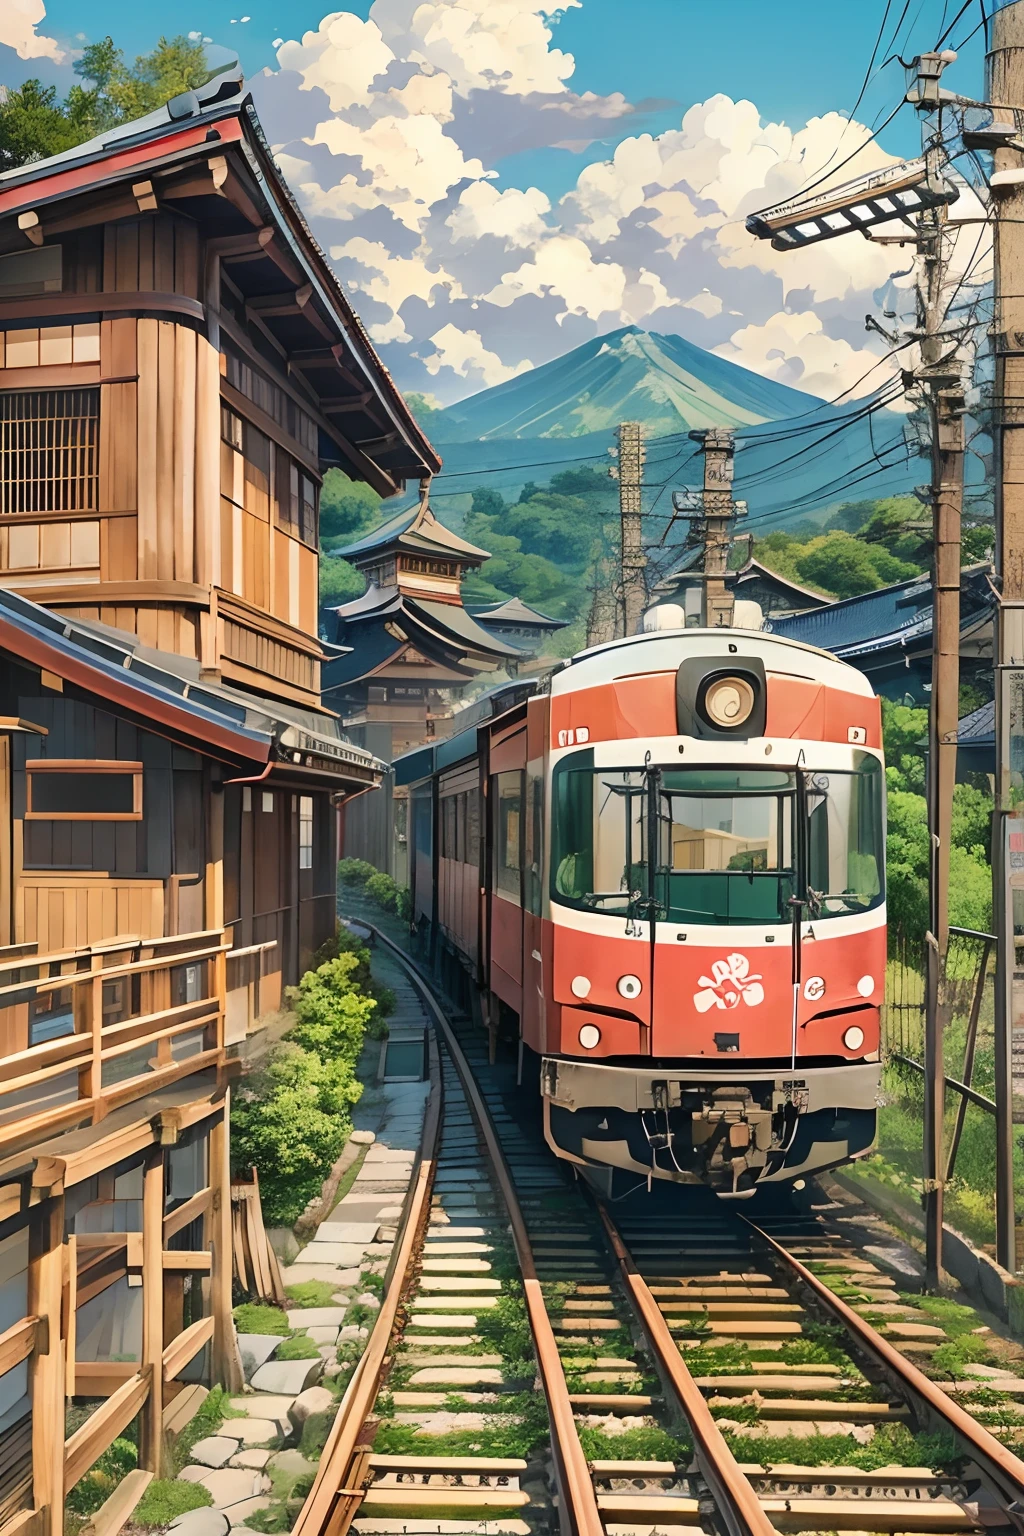 Japan train in the center、Japan countryside、Cinematic scenery、Studio Ghibli、Wooden station、during daytime、Clouds,masutepiece,Best Quality,Sketch style、